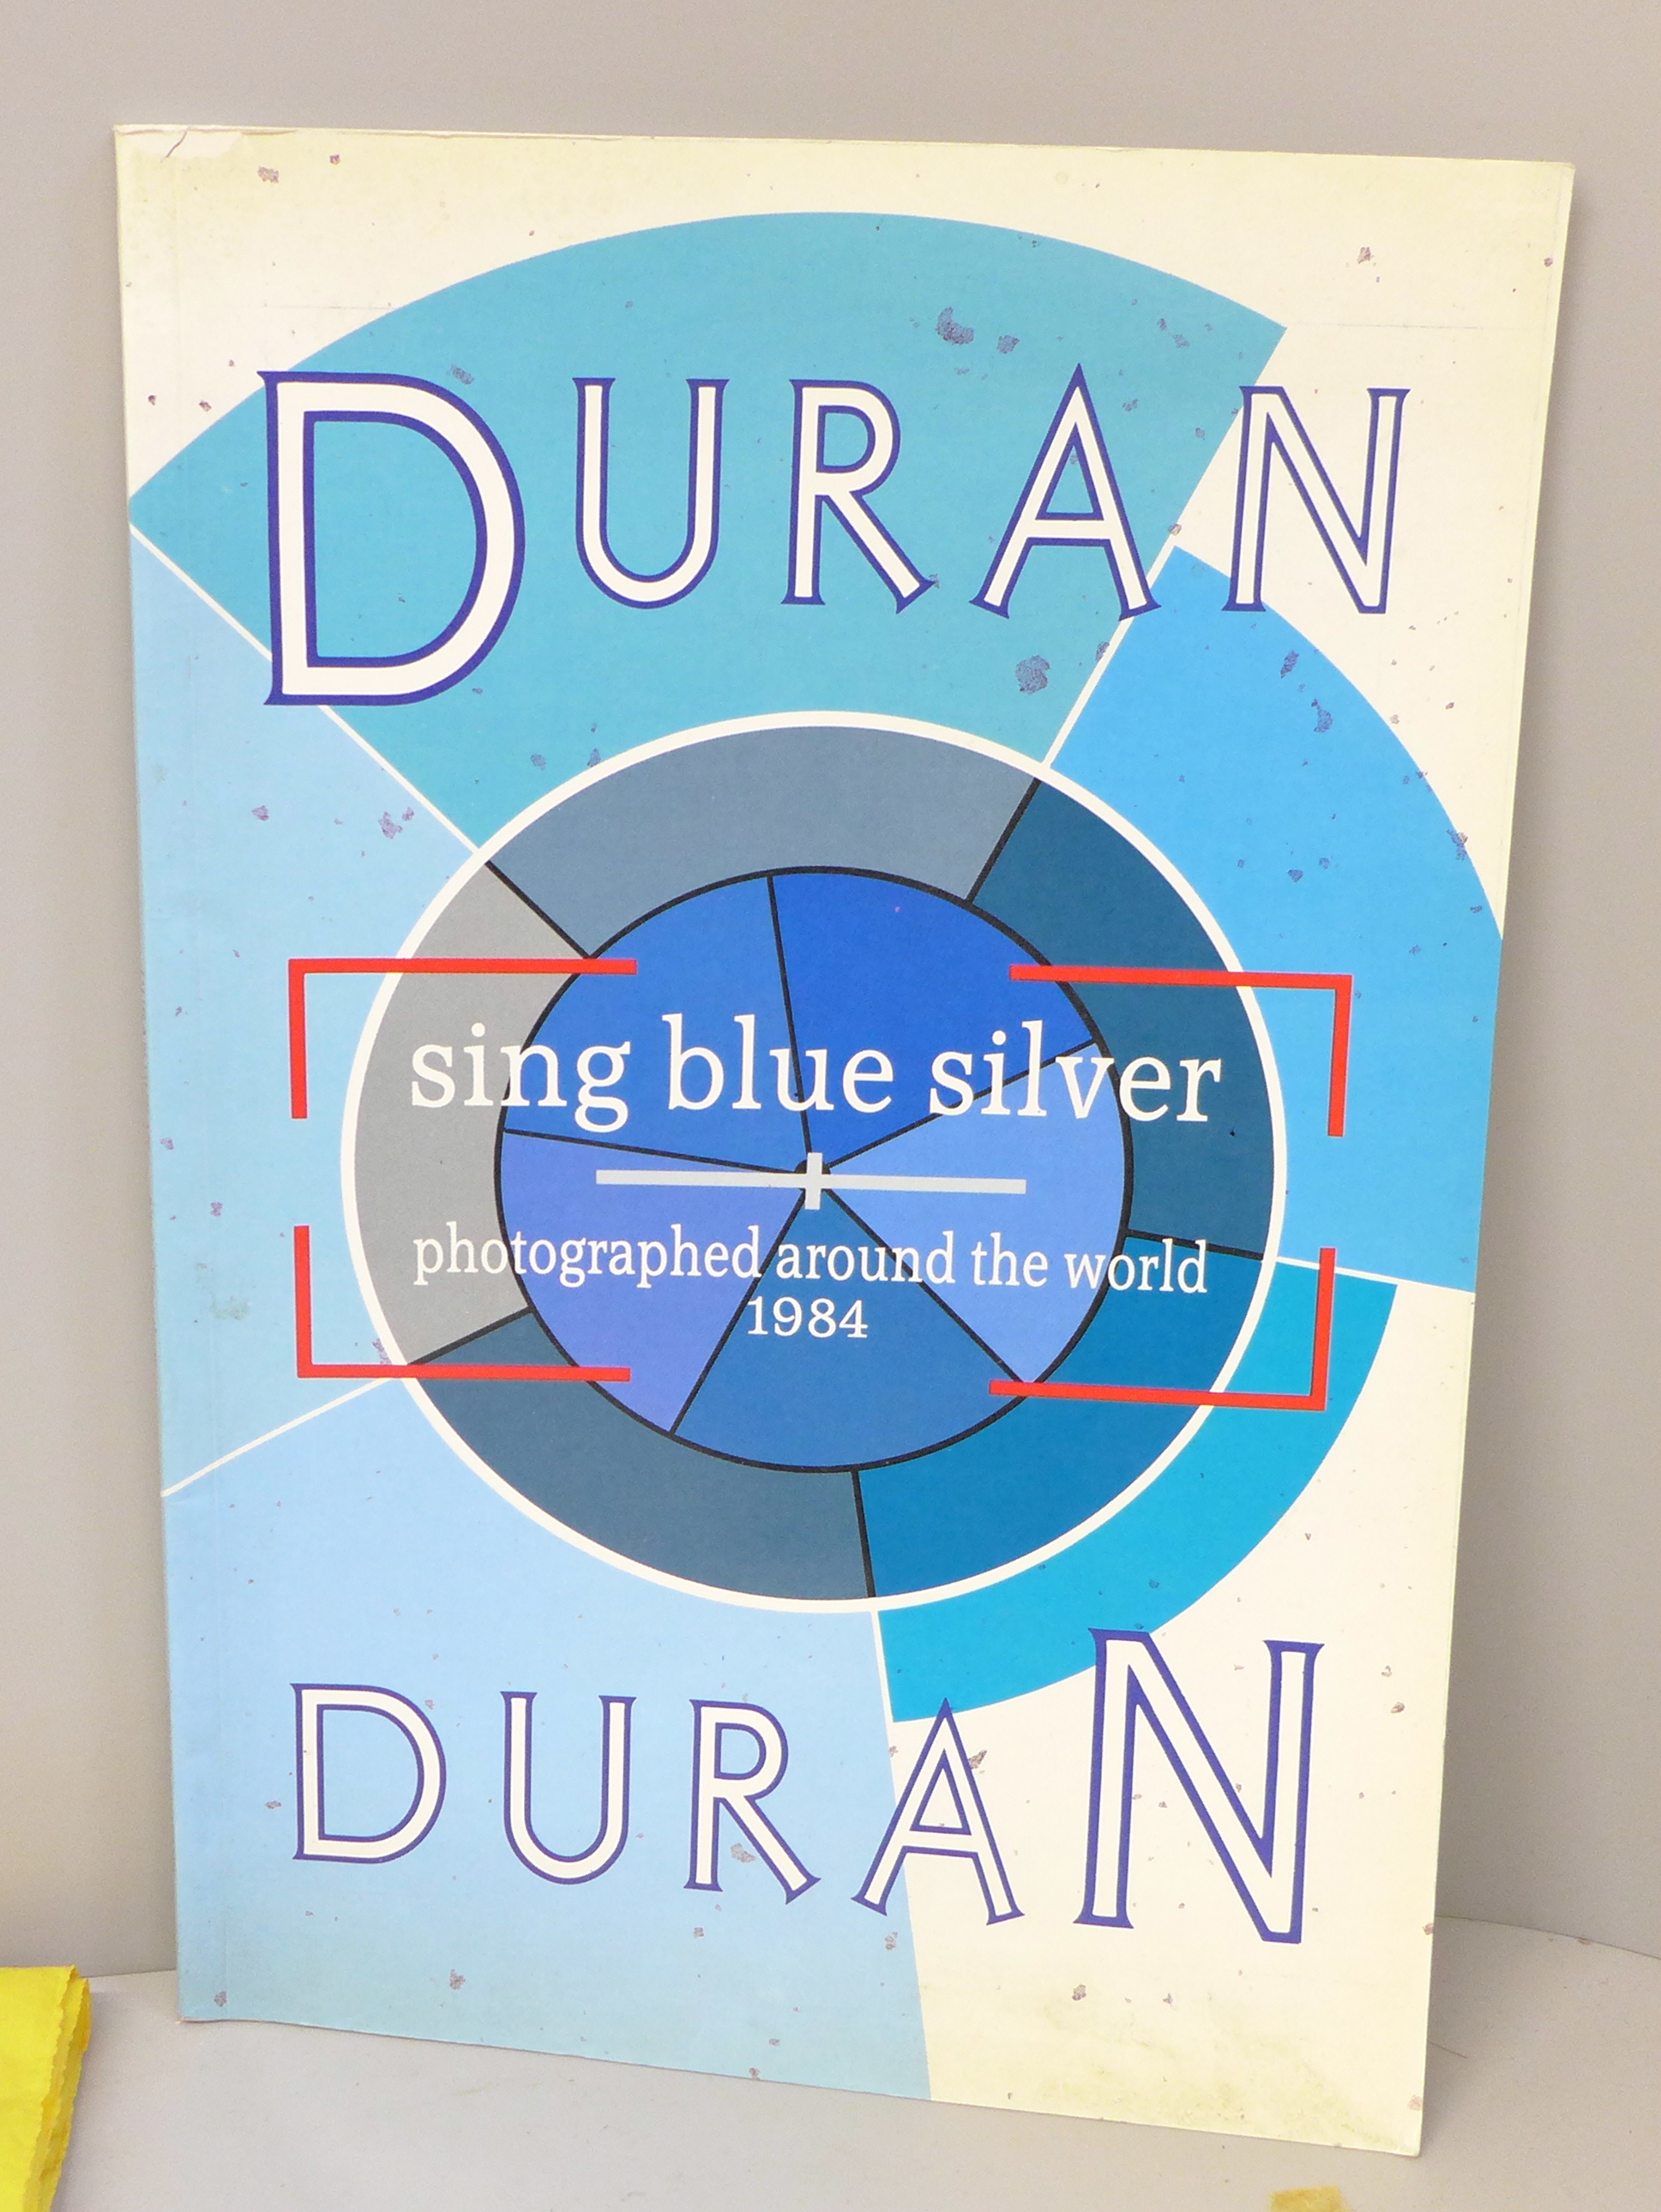 Duran Duran memorabilia including singles, posters, a book and fan club newsletters - Image 6 of 6